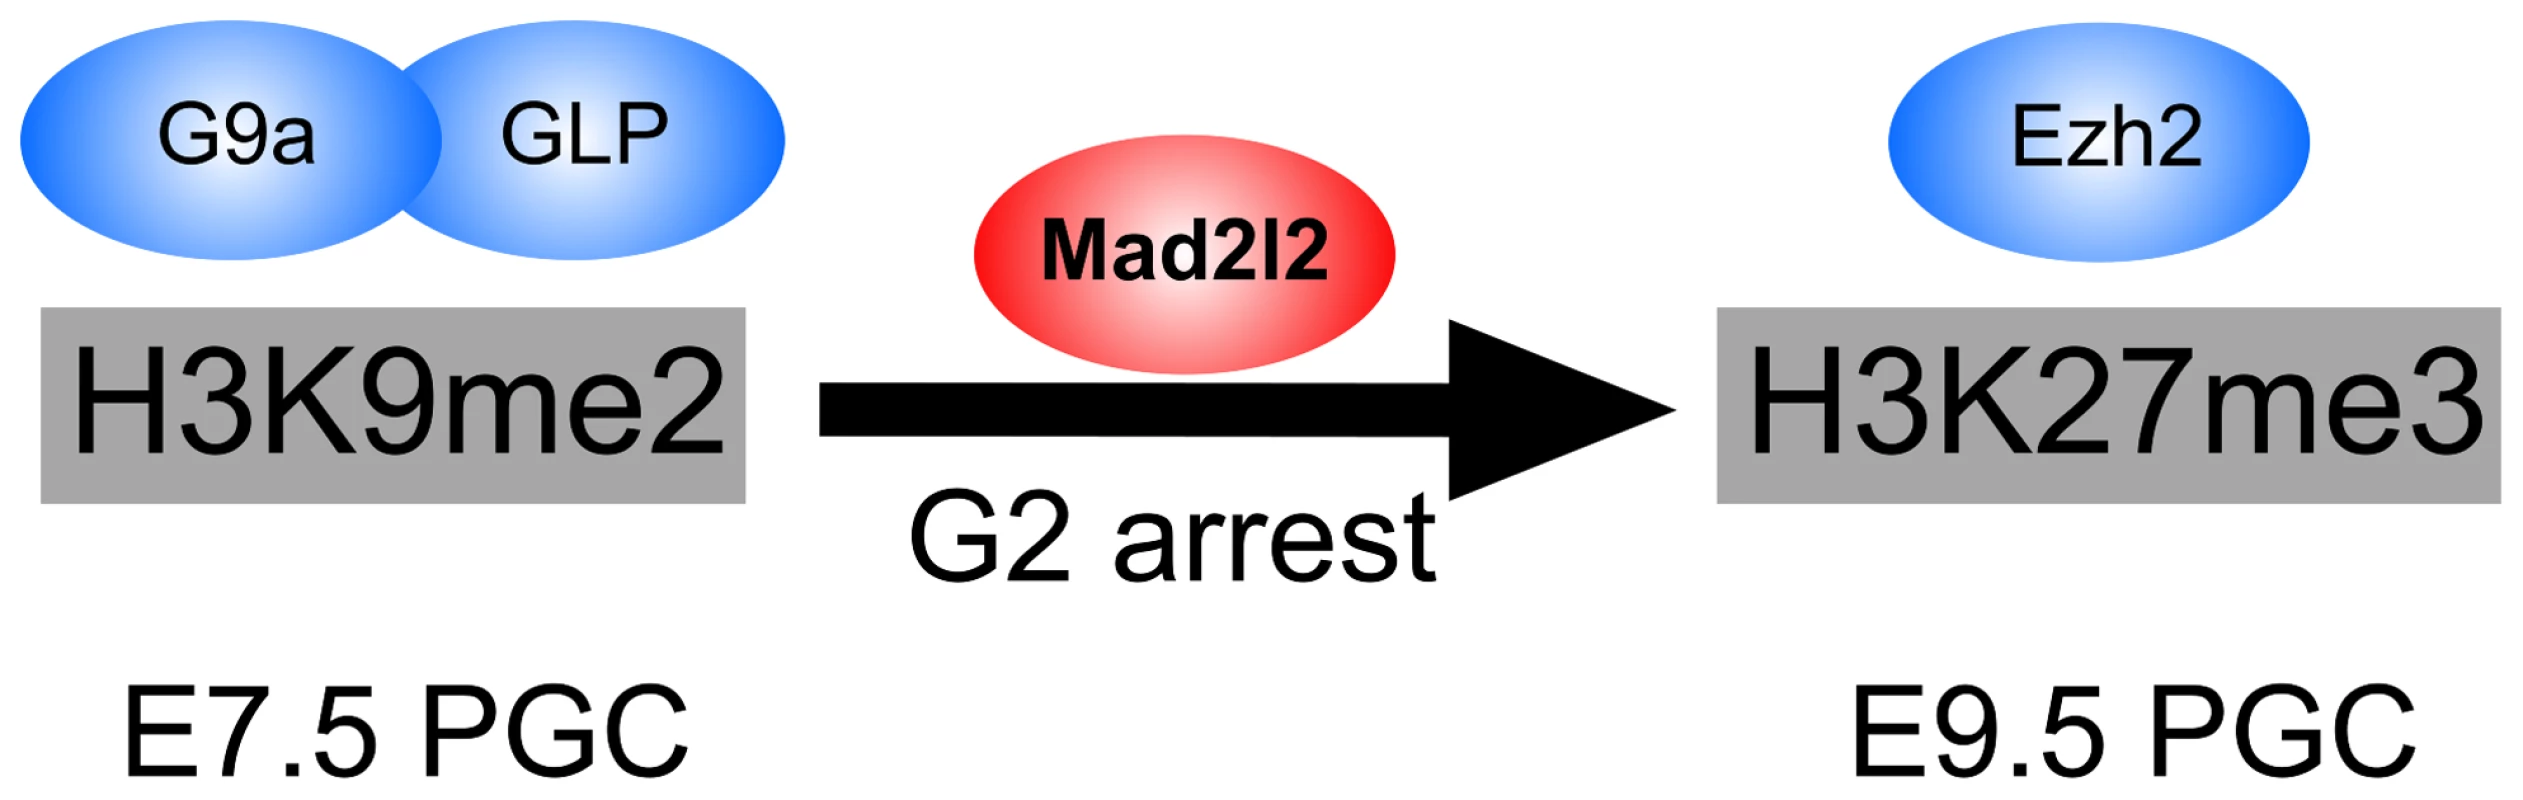 The role of Mad2l2 in epigenetic reprogramming and G2 arrest in PGCs.